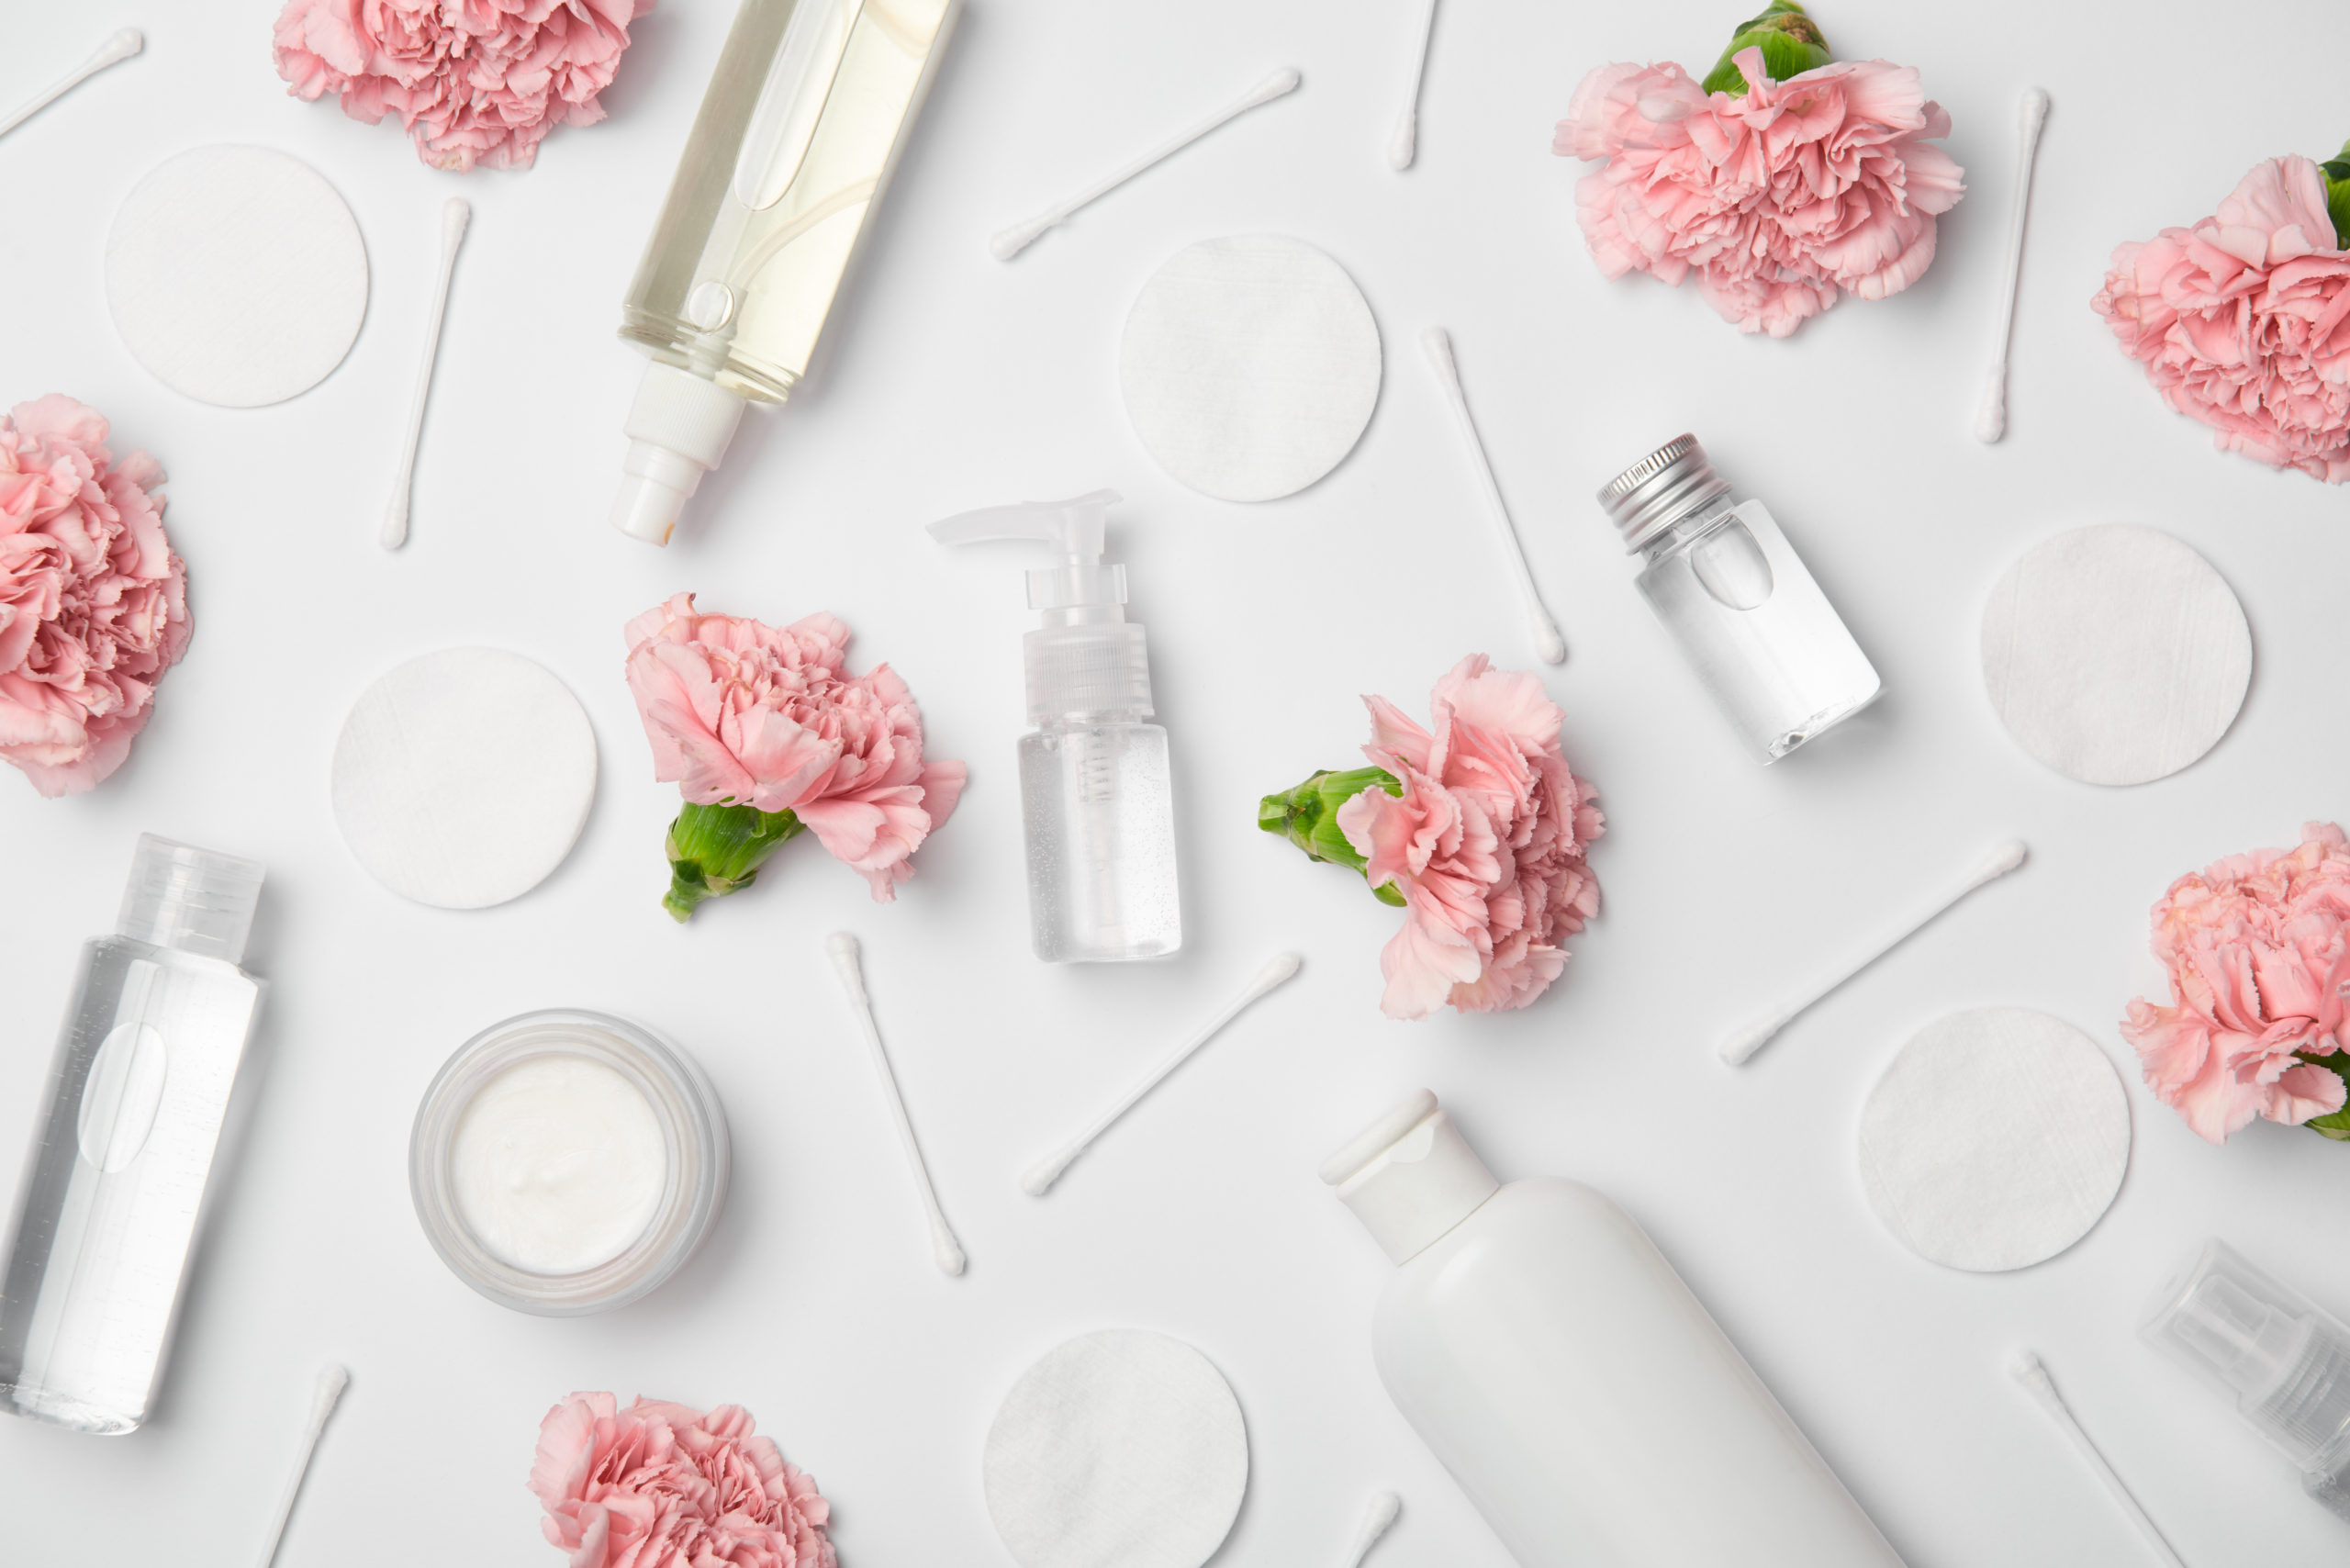 Top view of different cosmetic bottles, carnations flowers, cotton sticks and cosmetic pads on white